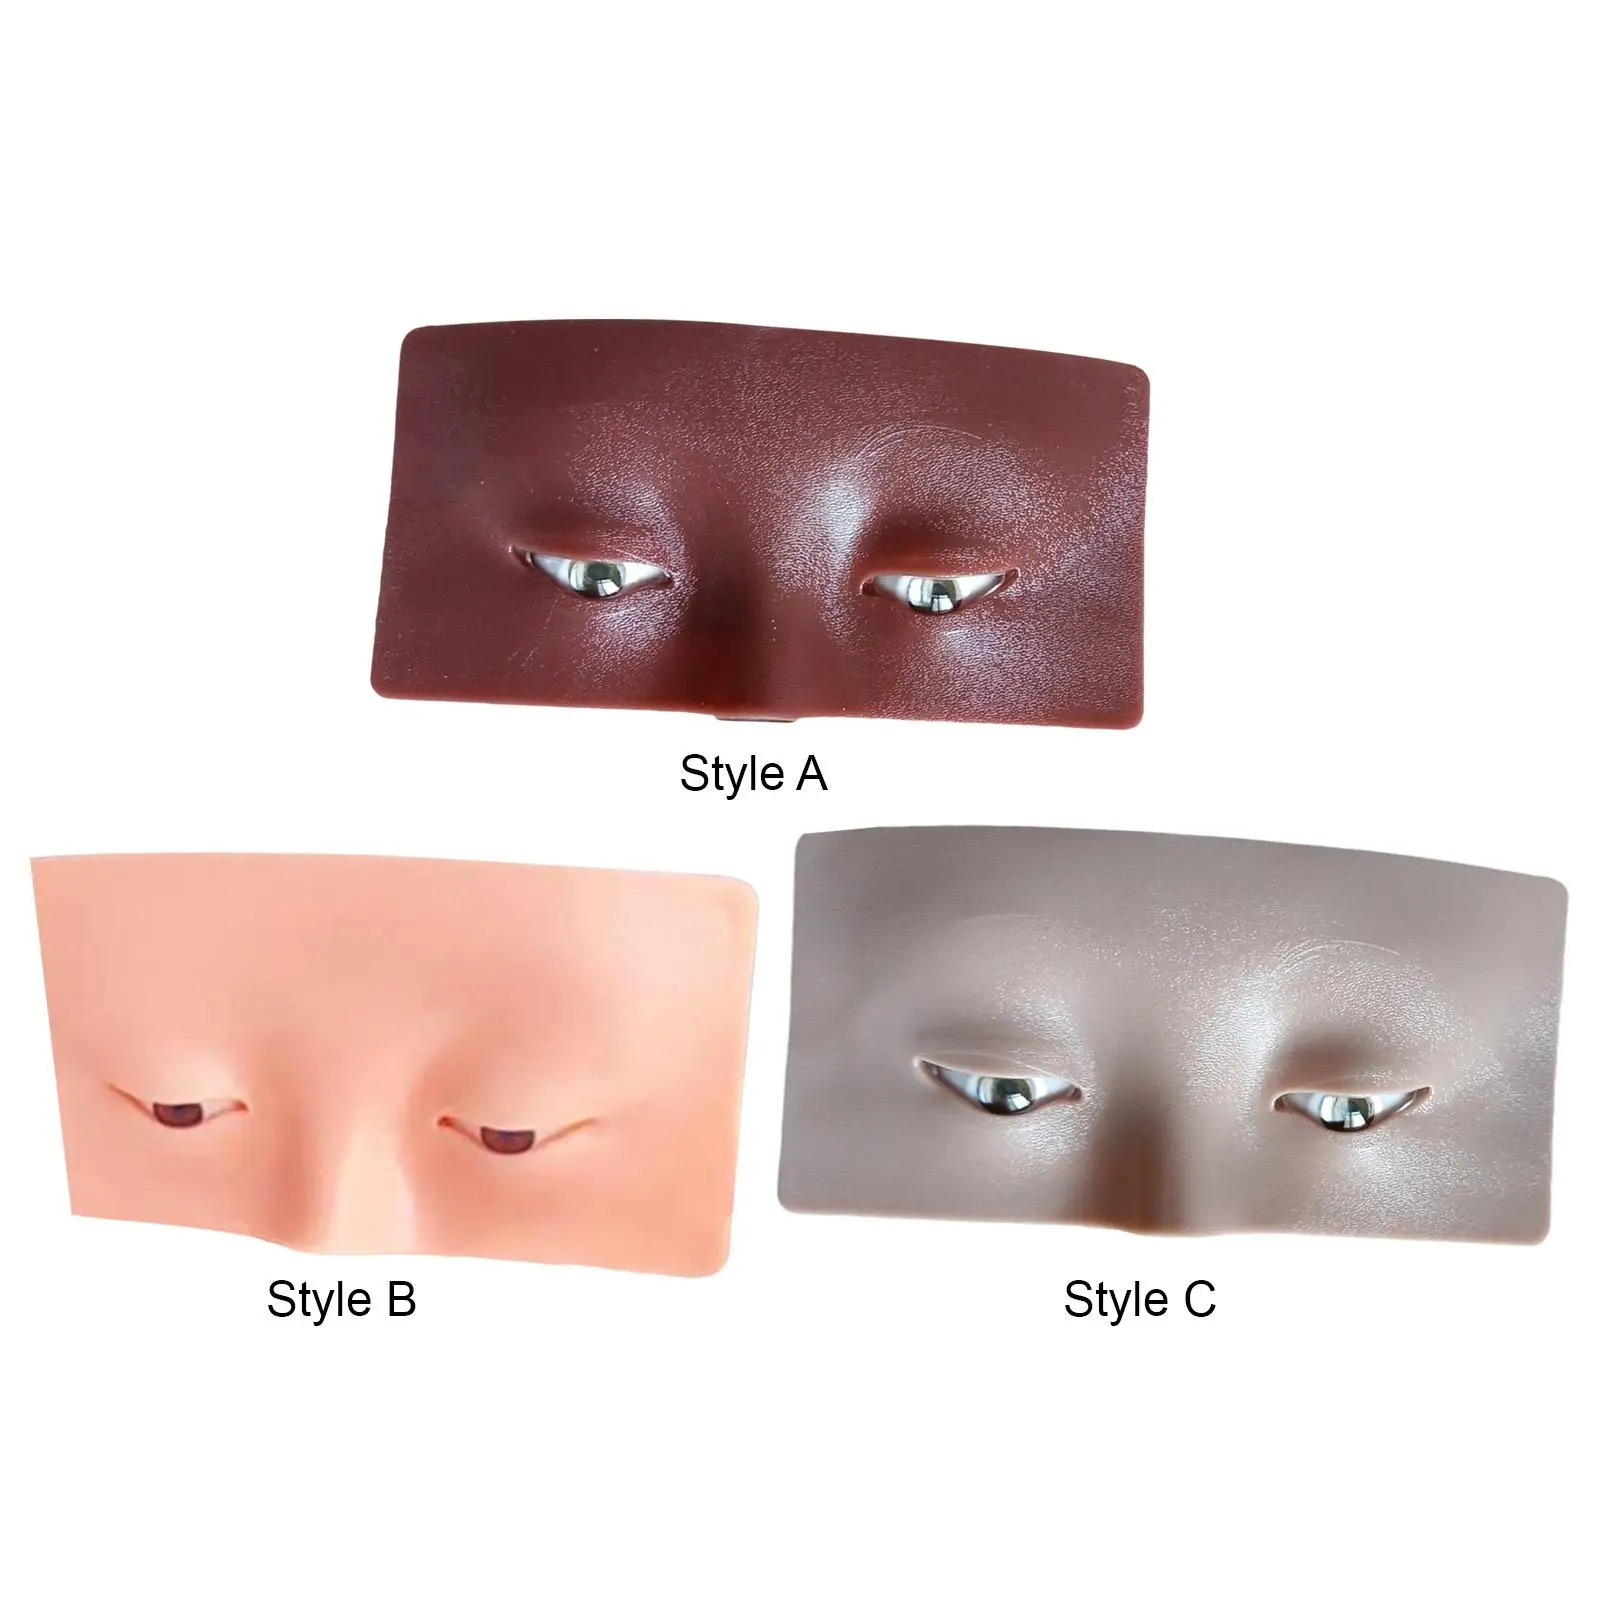 Eye Makeup Practice Face Reusable Beauty Tool Easy to Use for Makeup Training